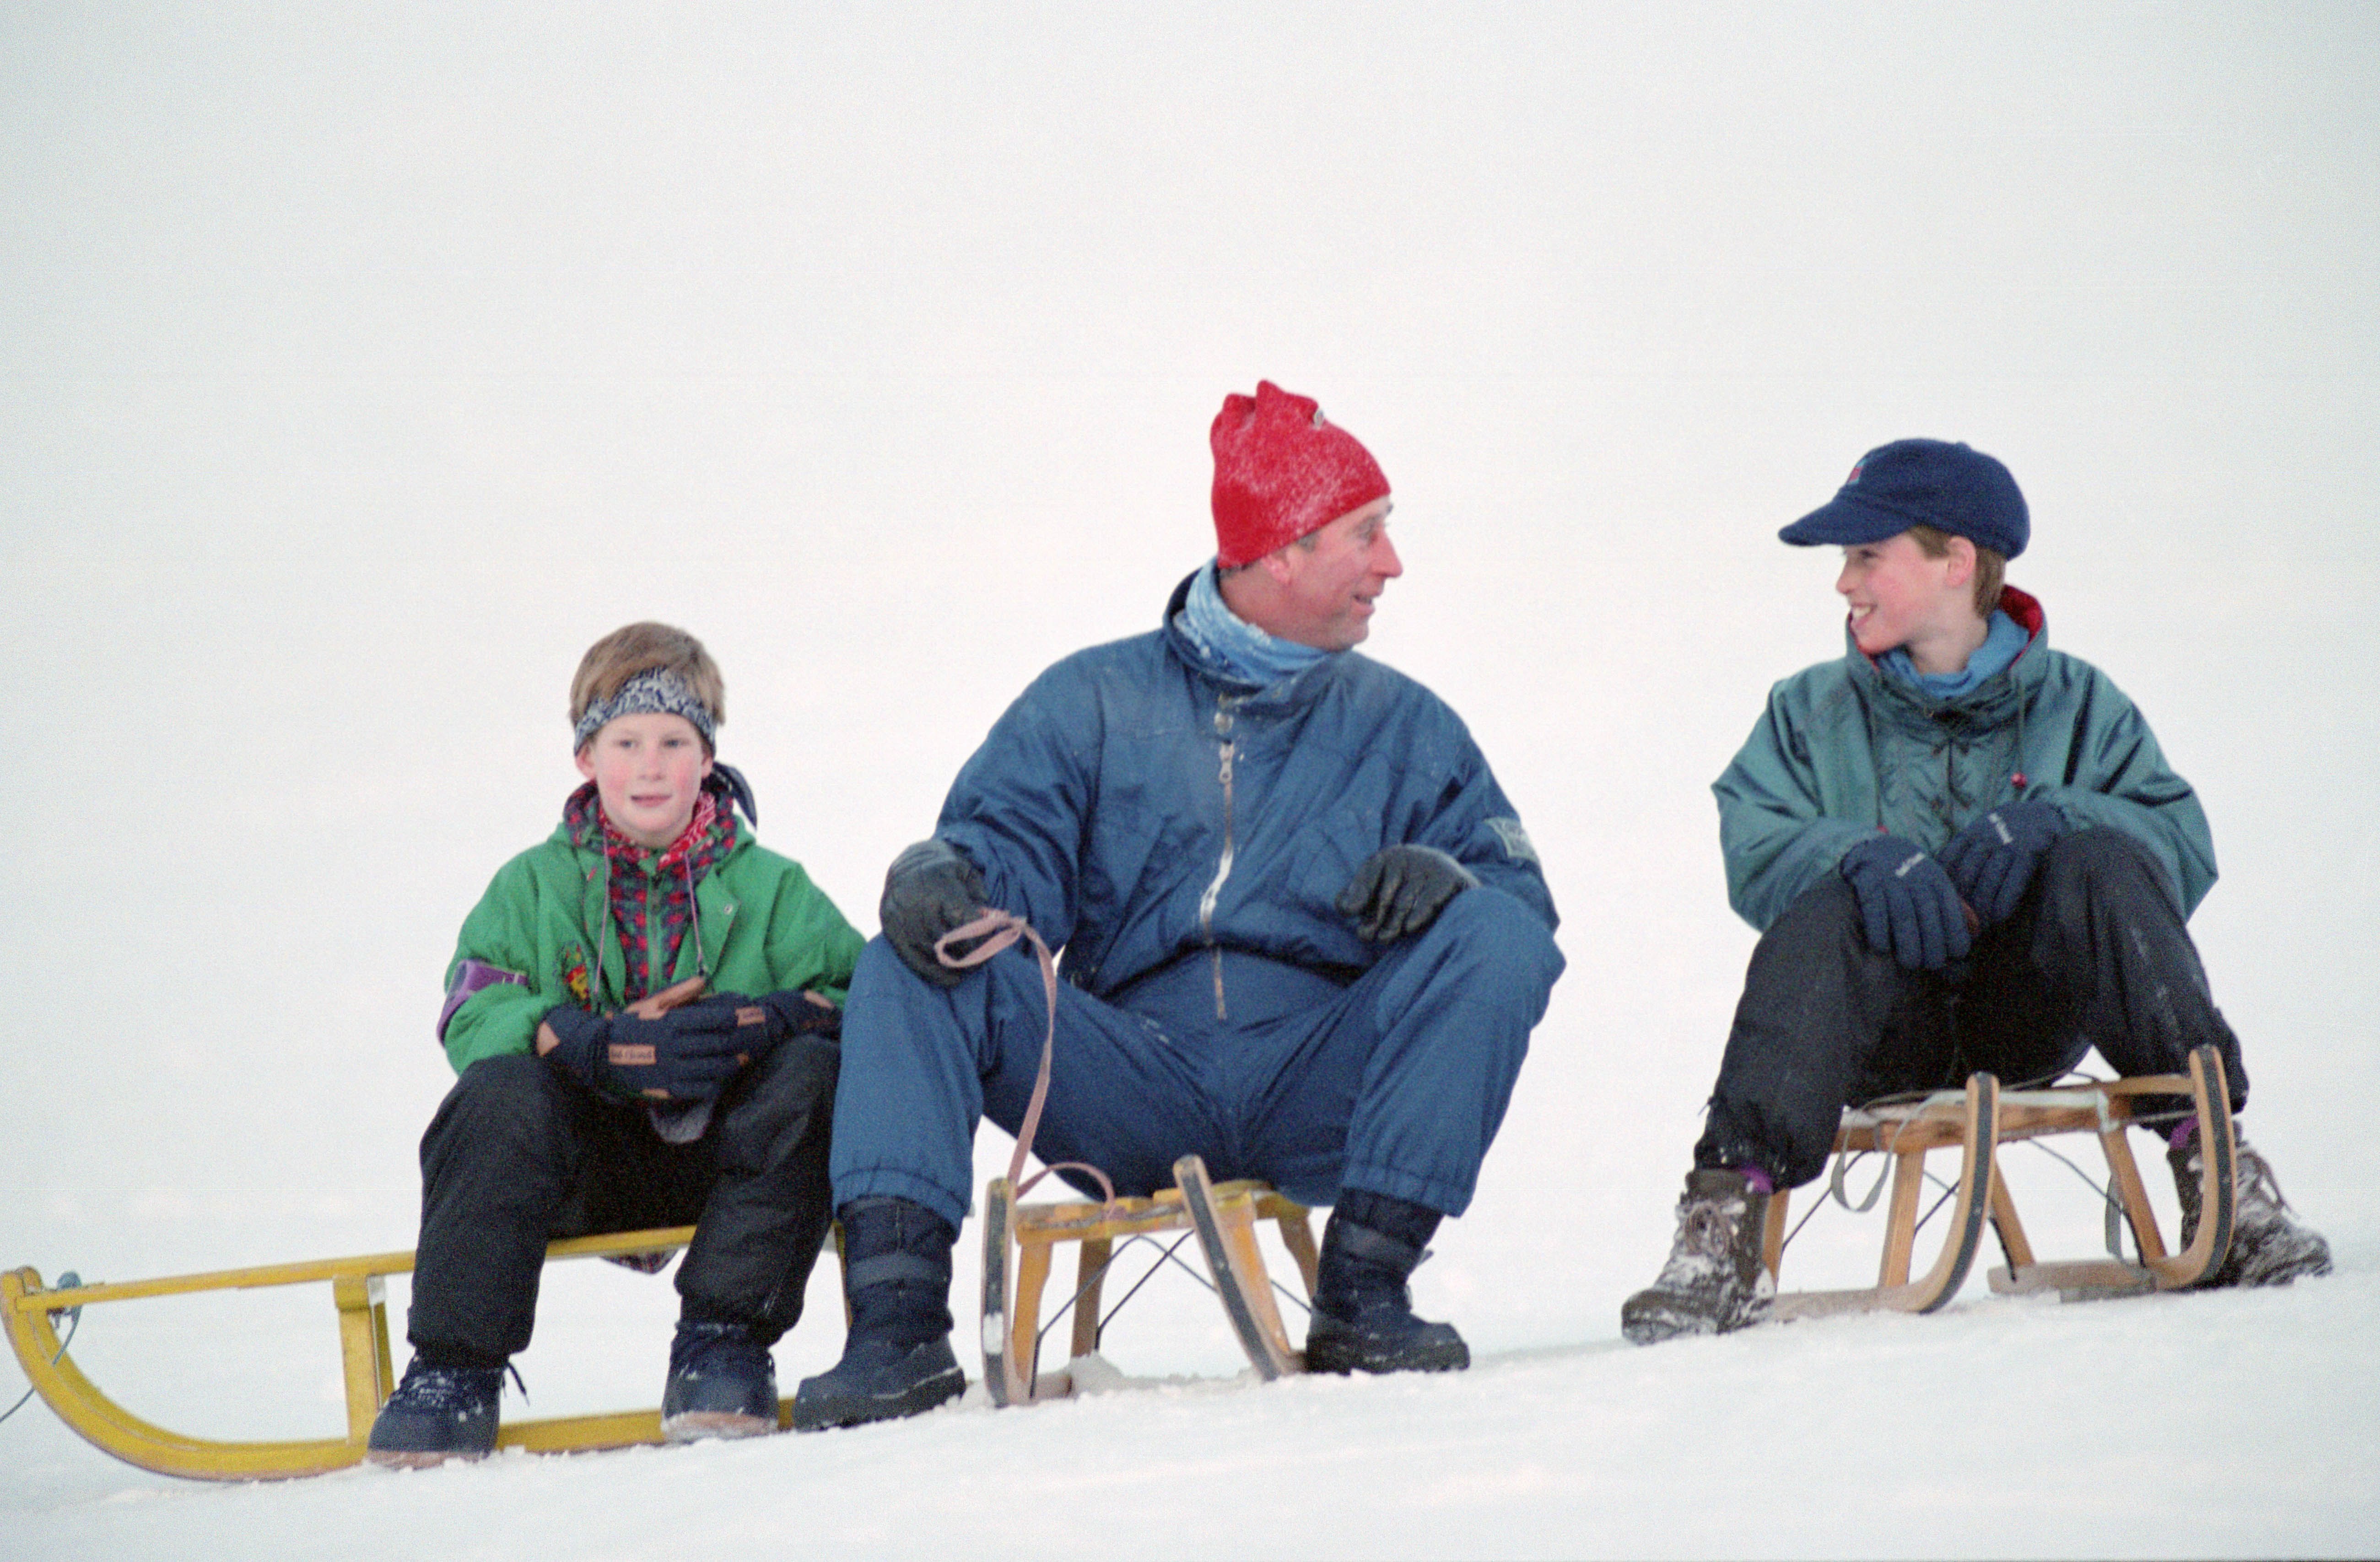 Prince Charles, Prince of Wales with his sons Prince William and Prince Harry on January 6, 1995 | Source: Getty Images